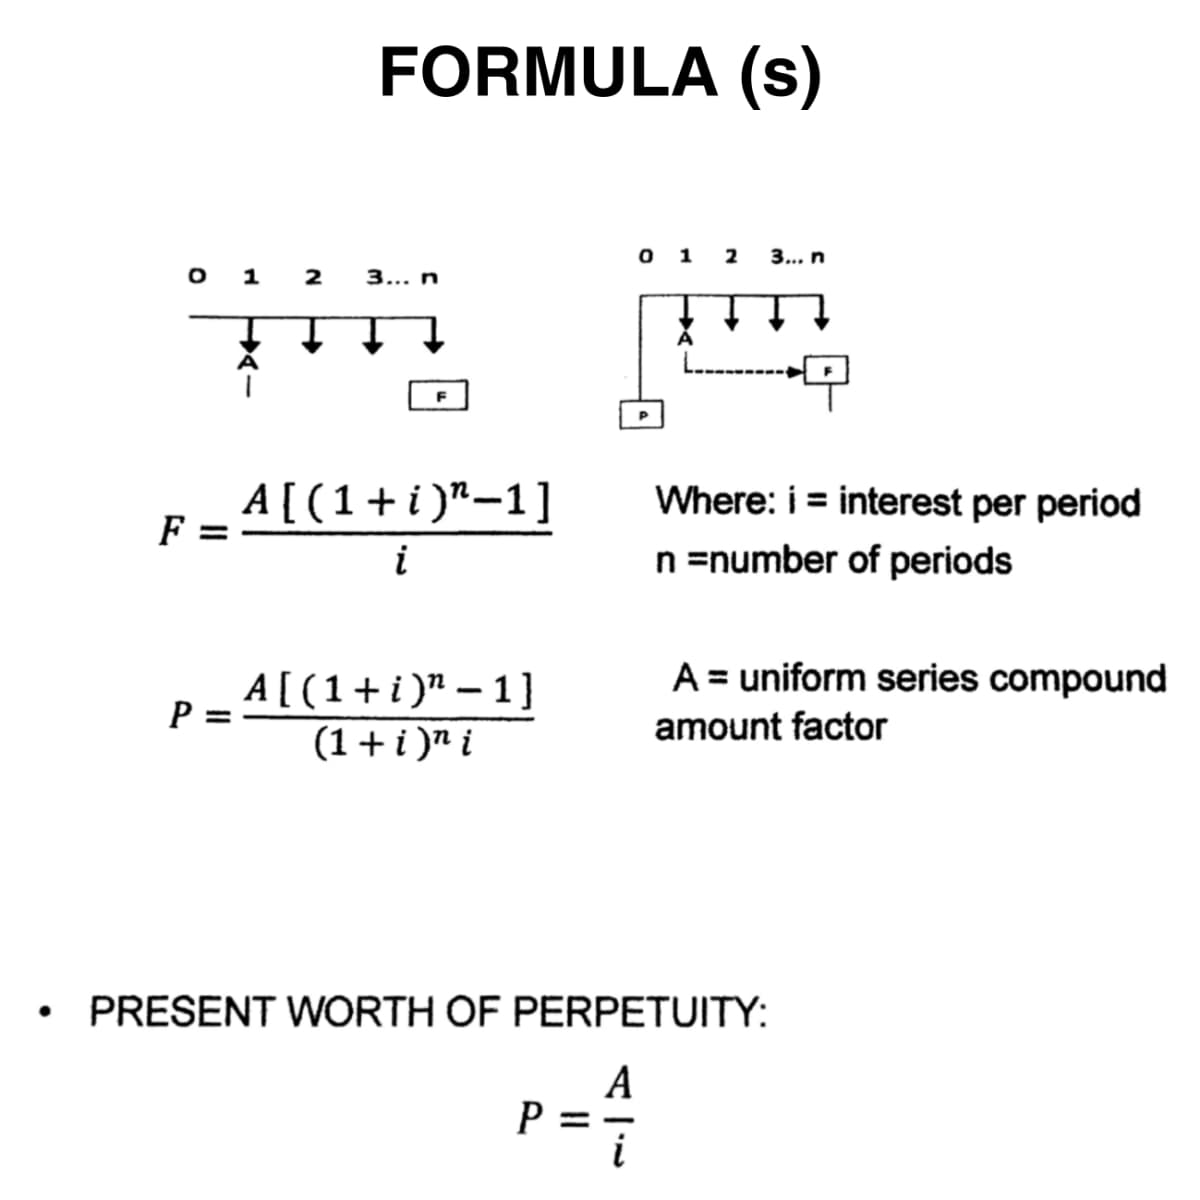 FORMULA (s)
о 1 2 3...n
o 1 2
3... n
A[(1+i)"-1]
Where: i = interest per period
n =number of periods
F =
i
A = uniform series compound
A[(1+i)" – 1]
(1+ i )" i
P =
amount factor
PRESENT WORTH OF PERPETUITY:
A
P
